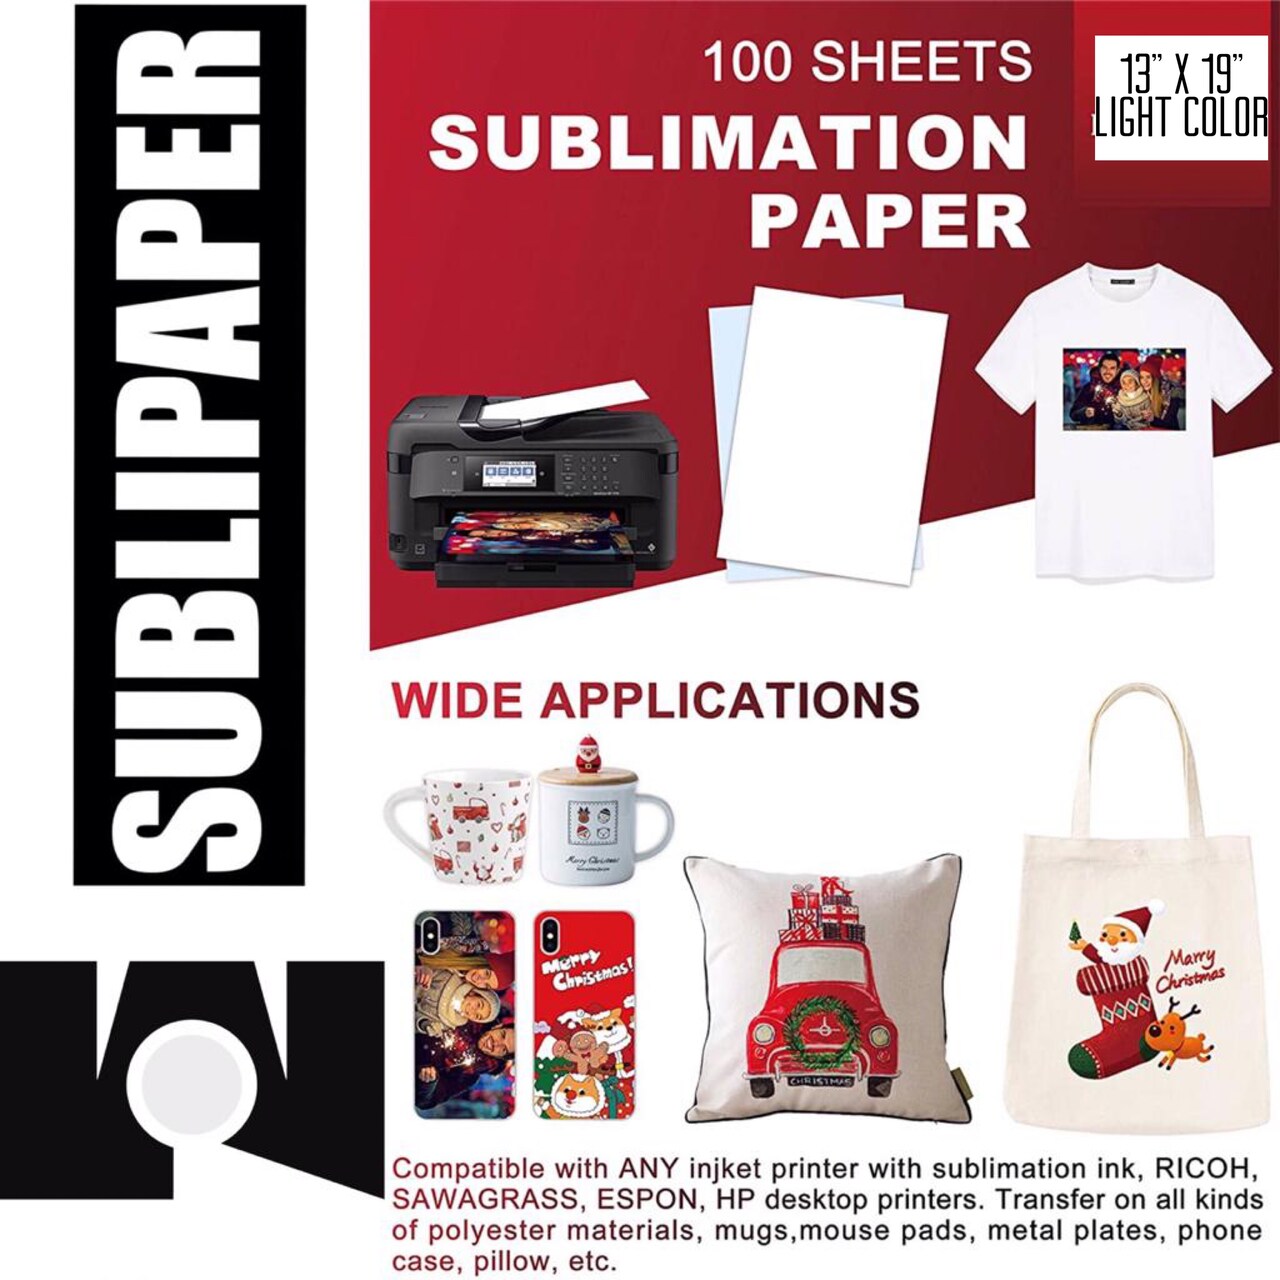 SUBLIPAPER Dye Sublimation Transfer Paper for Sawgrass, Epson and